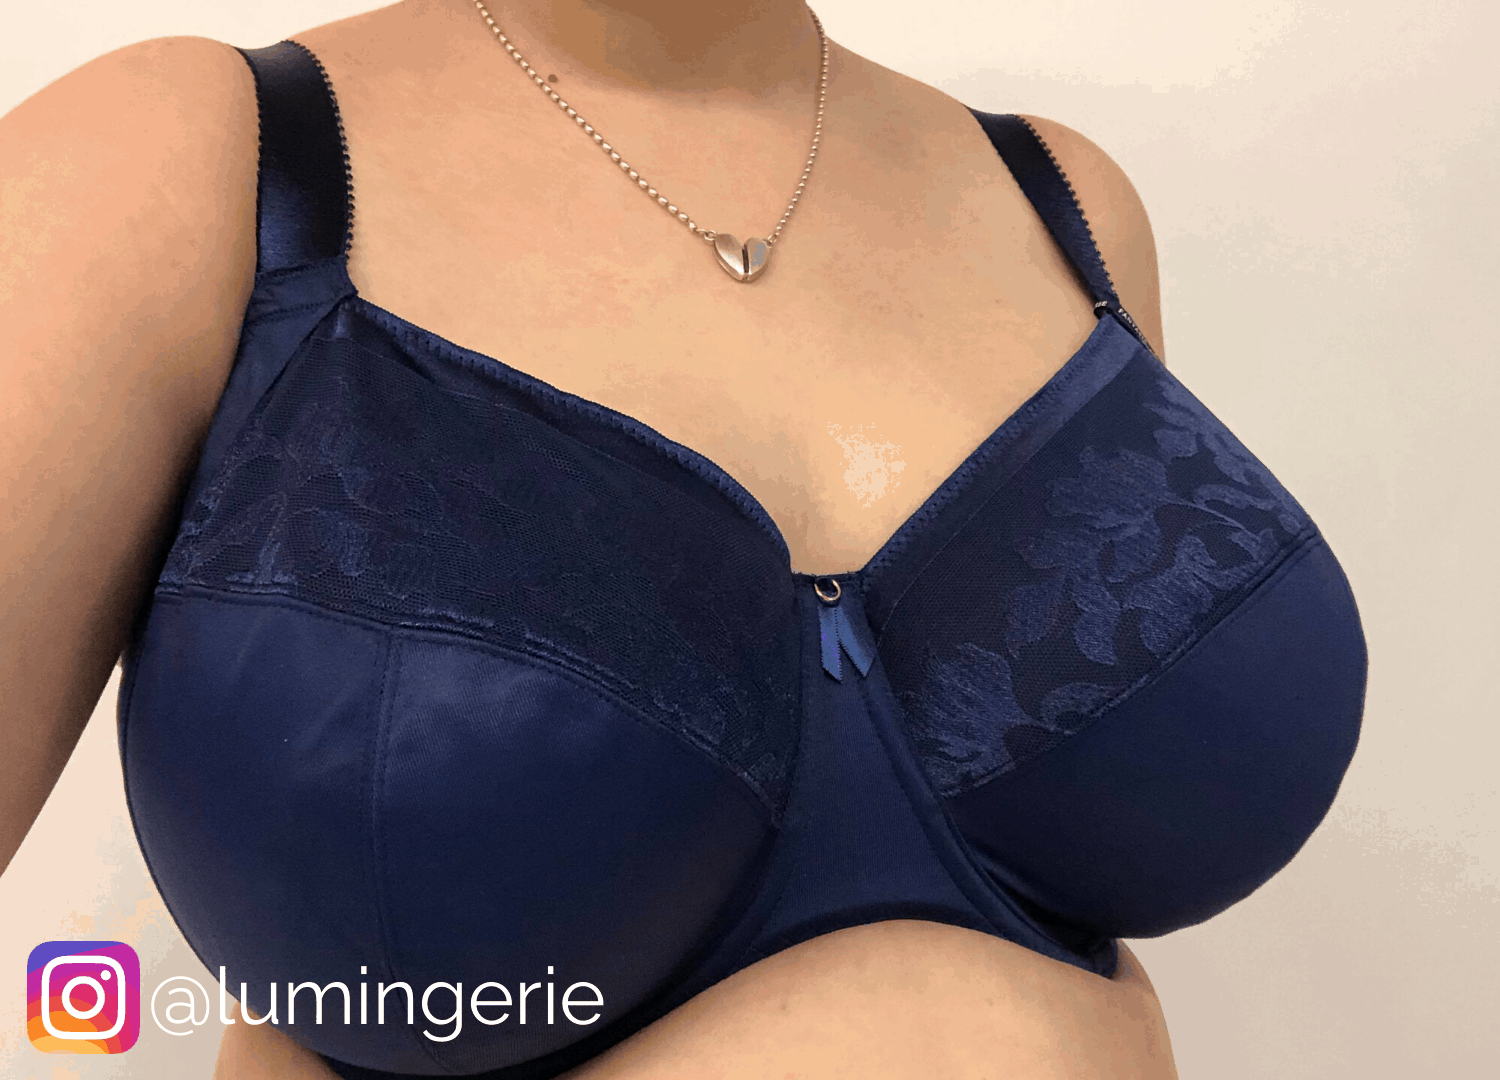 https://www.lumingerie.com/images/products/fantasie-illusion-navy-ss20-lumingerieig_orig.png